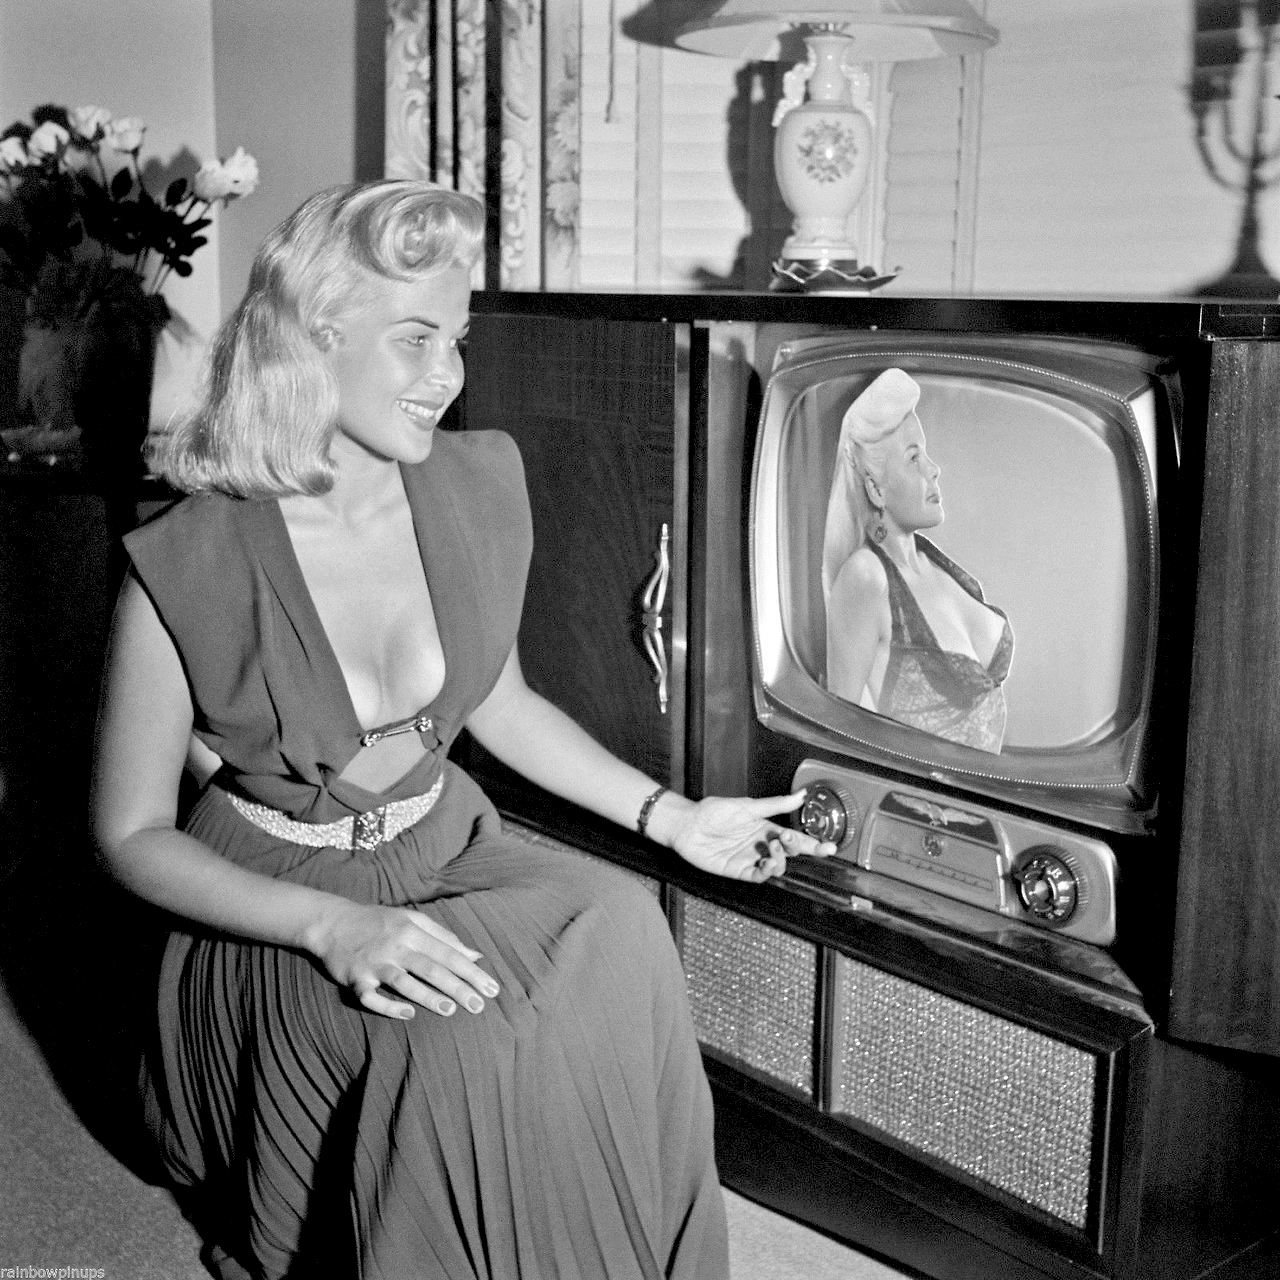 The sexy gloria pall posing in front of a tv with her image, that is actual...